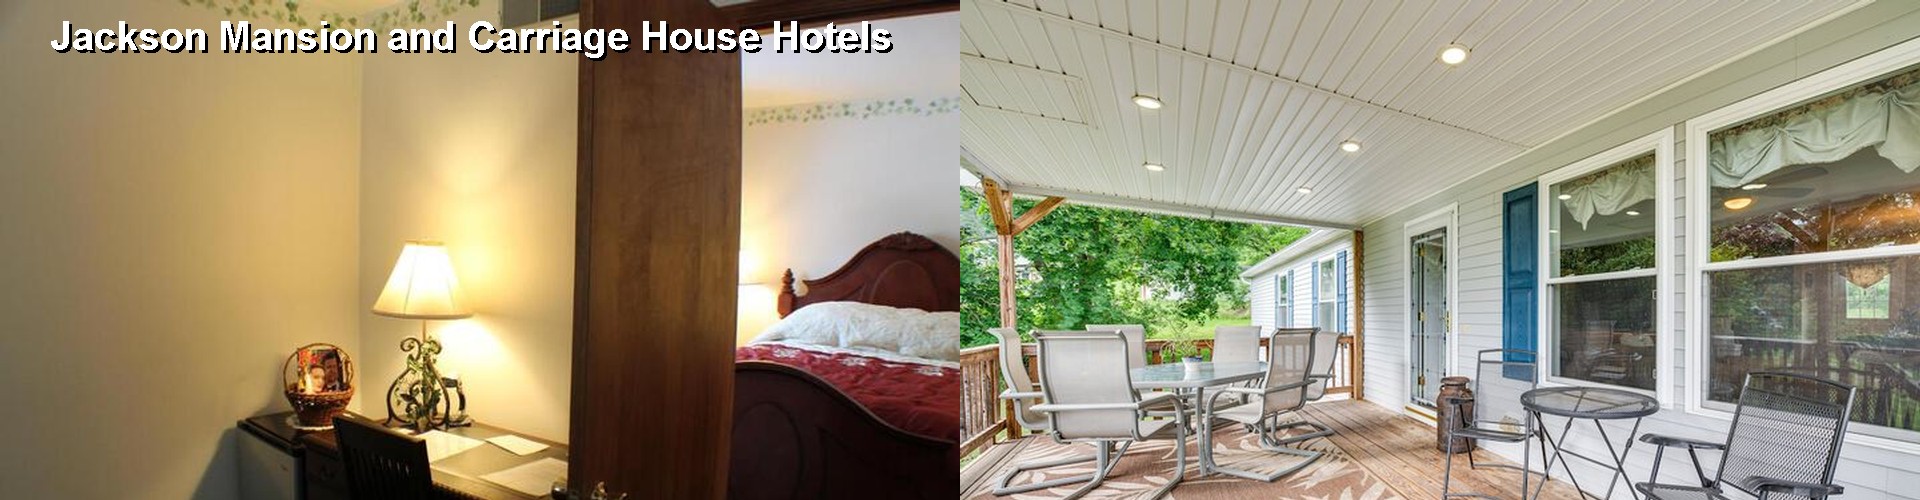 4 Best Hotels near Jackson Mansion and Carriage House